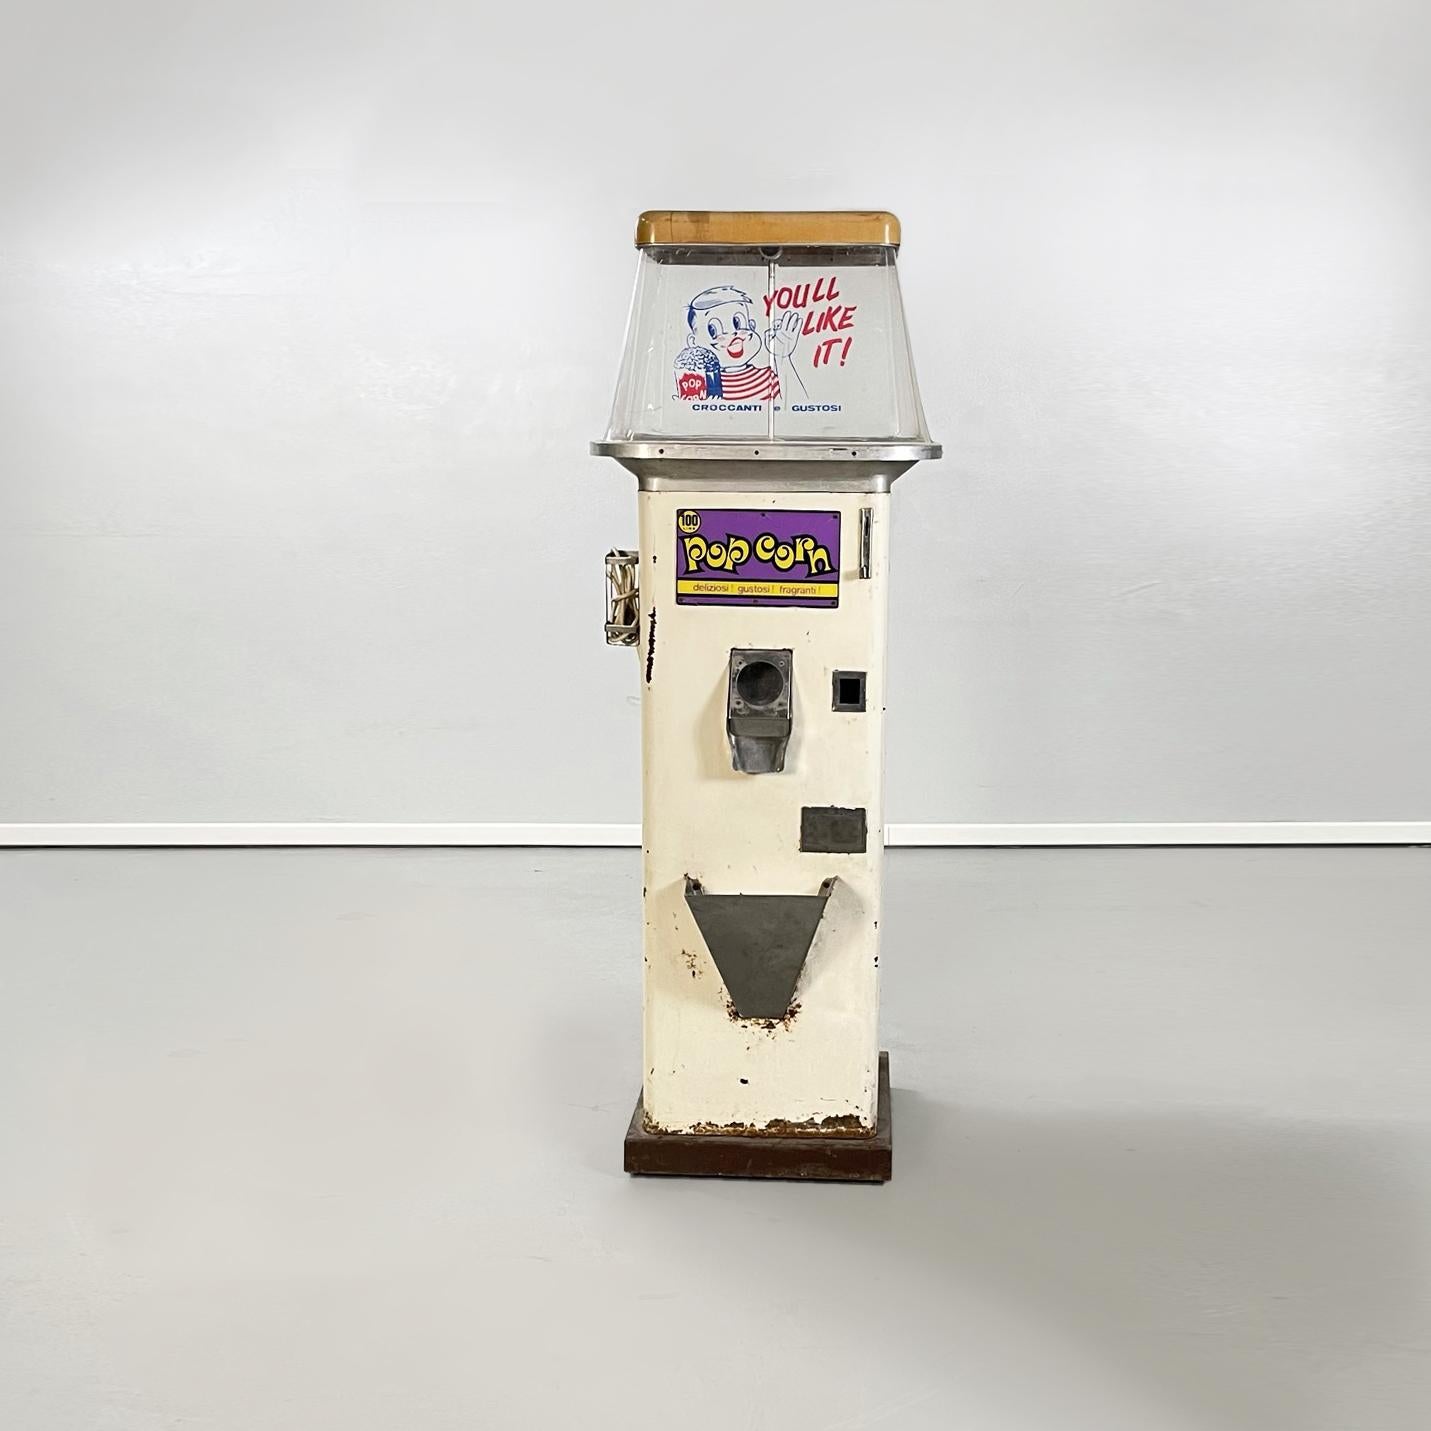 Italian mid-century floor electric white metal and plastic popcorn machine, 1960s
Floor standing electric popcorn machine with square base in cream white painted metal and upper structure for making popcorn in transparent painted plastic and metal.